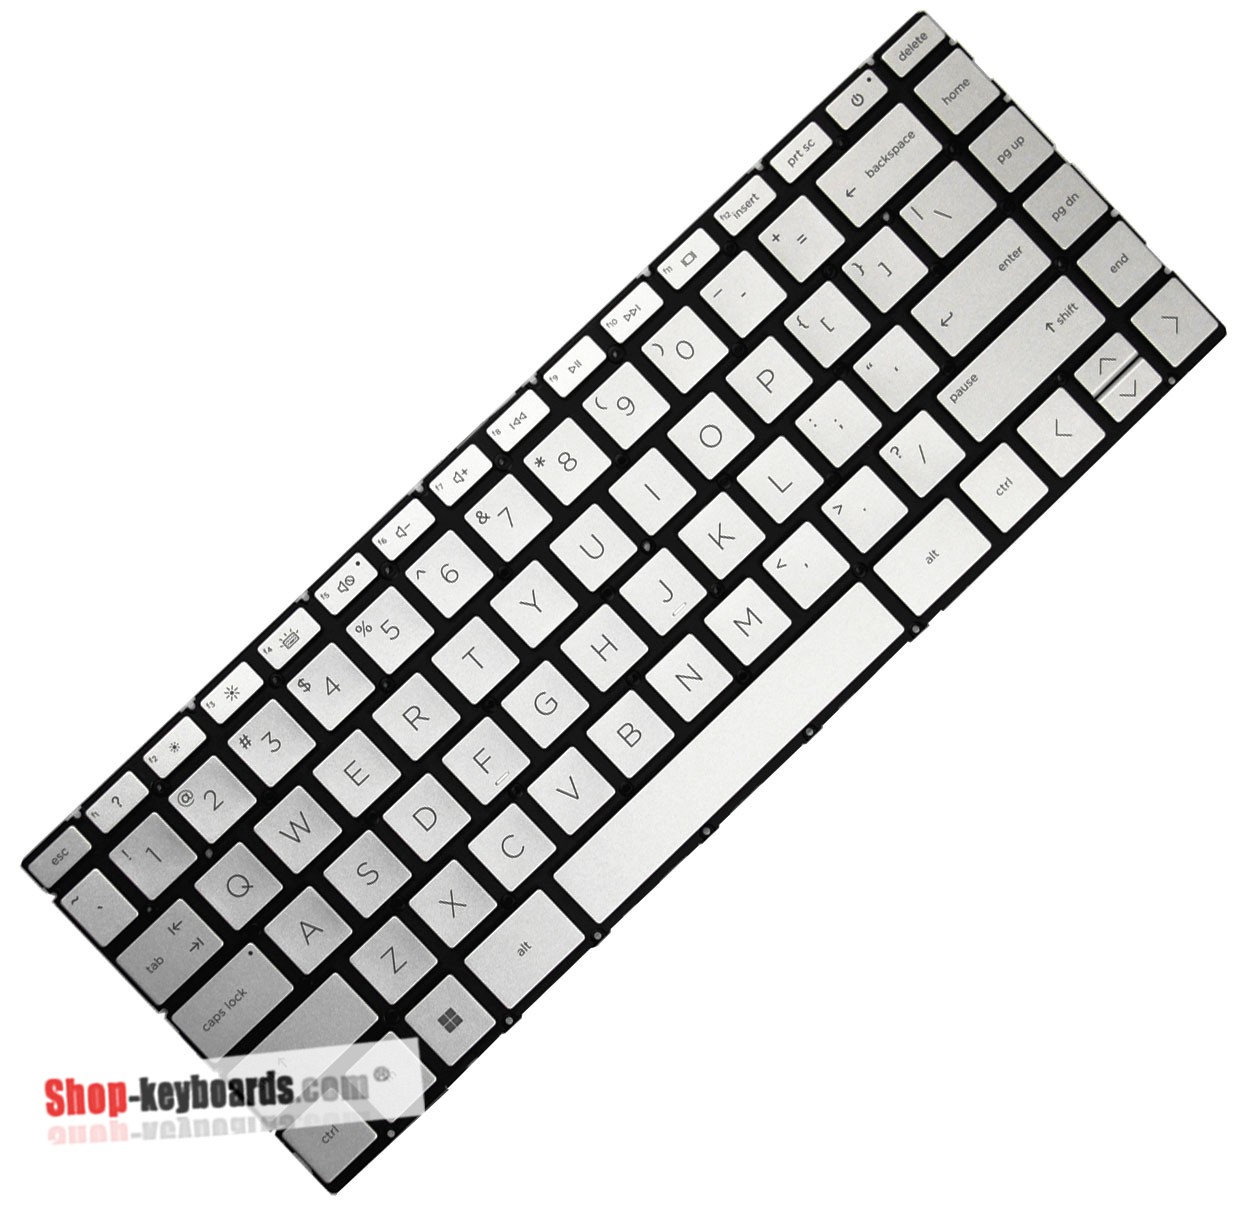 HP SG-A9900-XIA Keyboard replacement